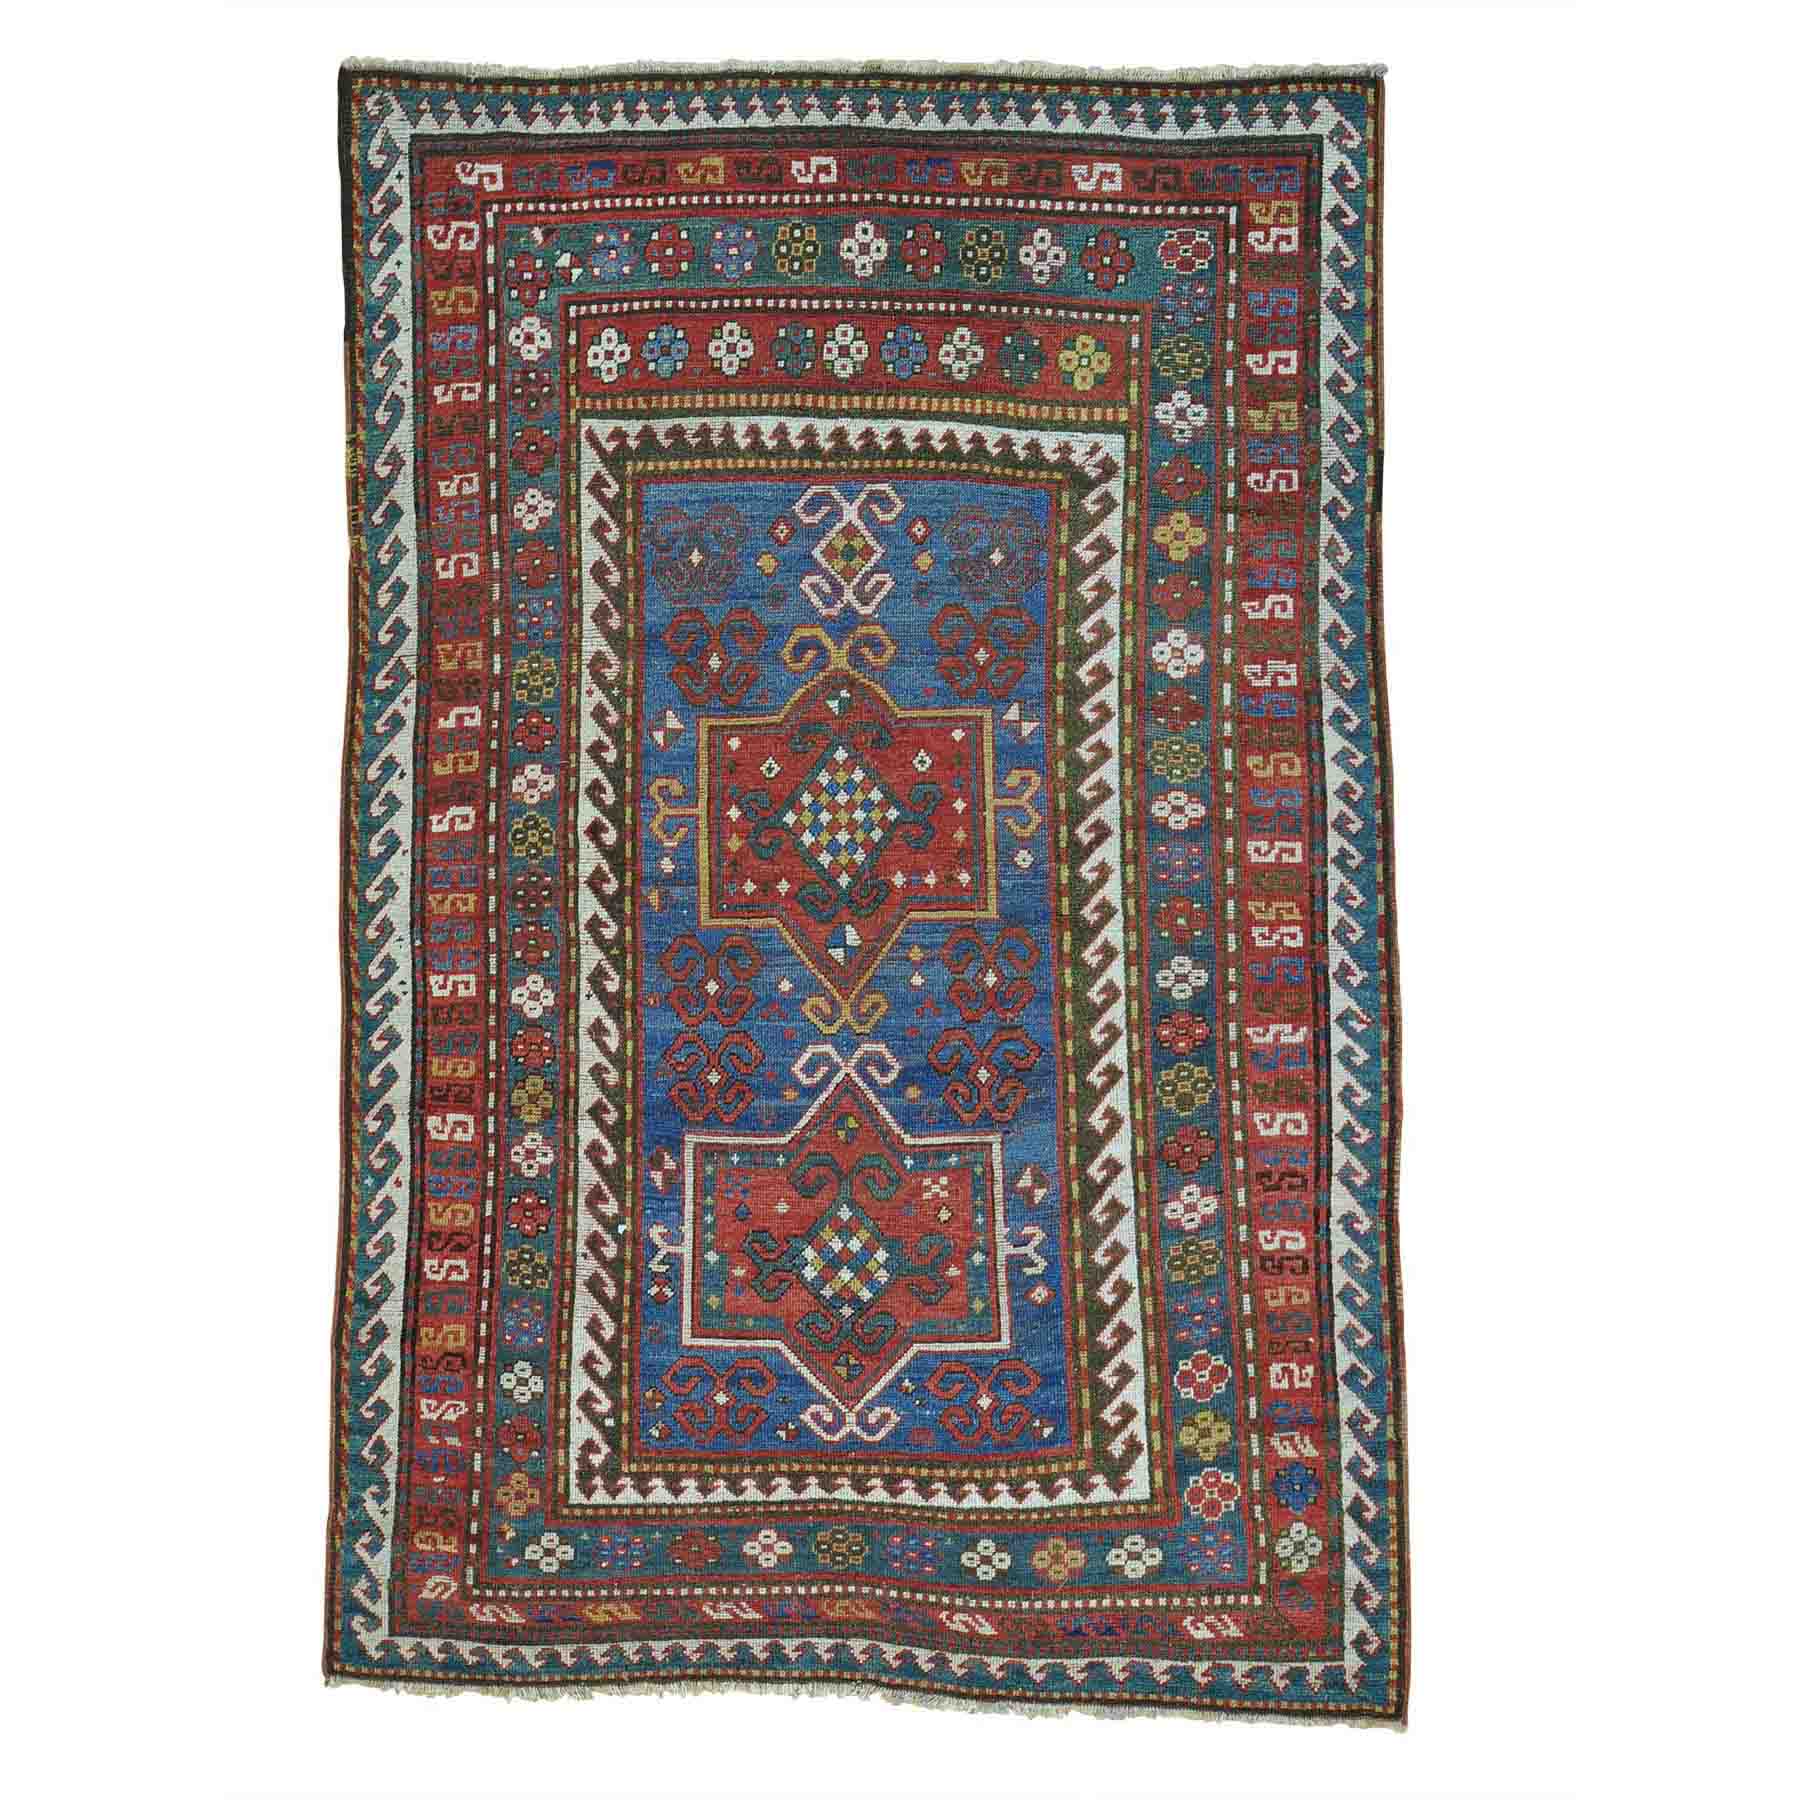 Antique-Hand-Knotted-Rug-141155